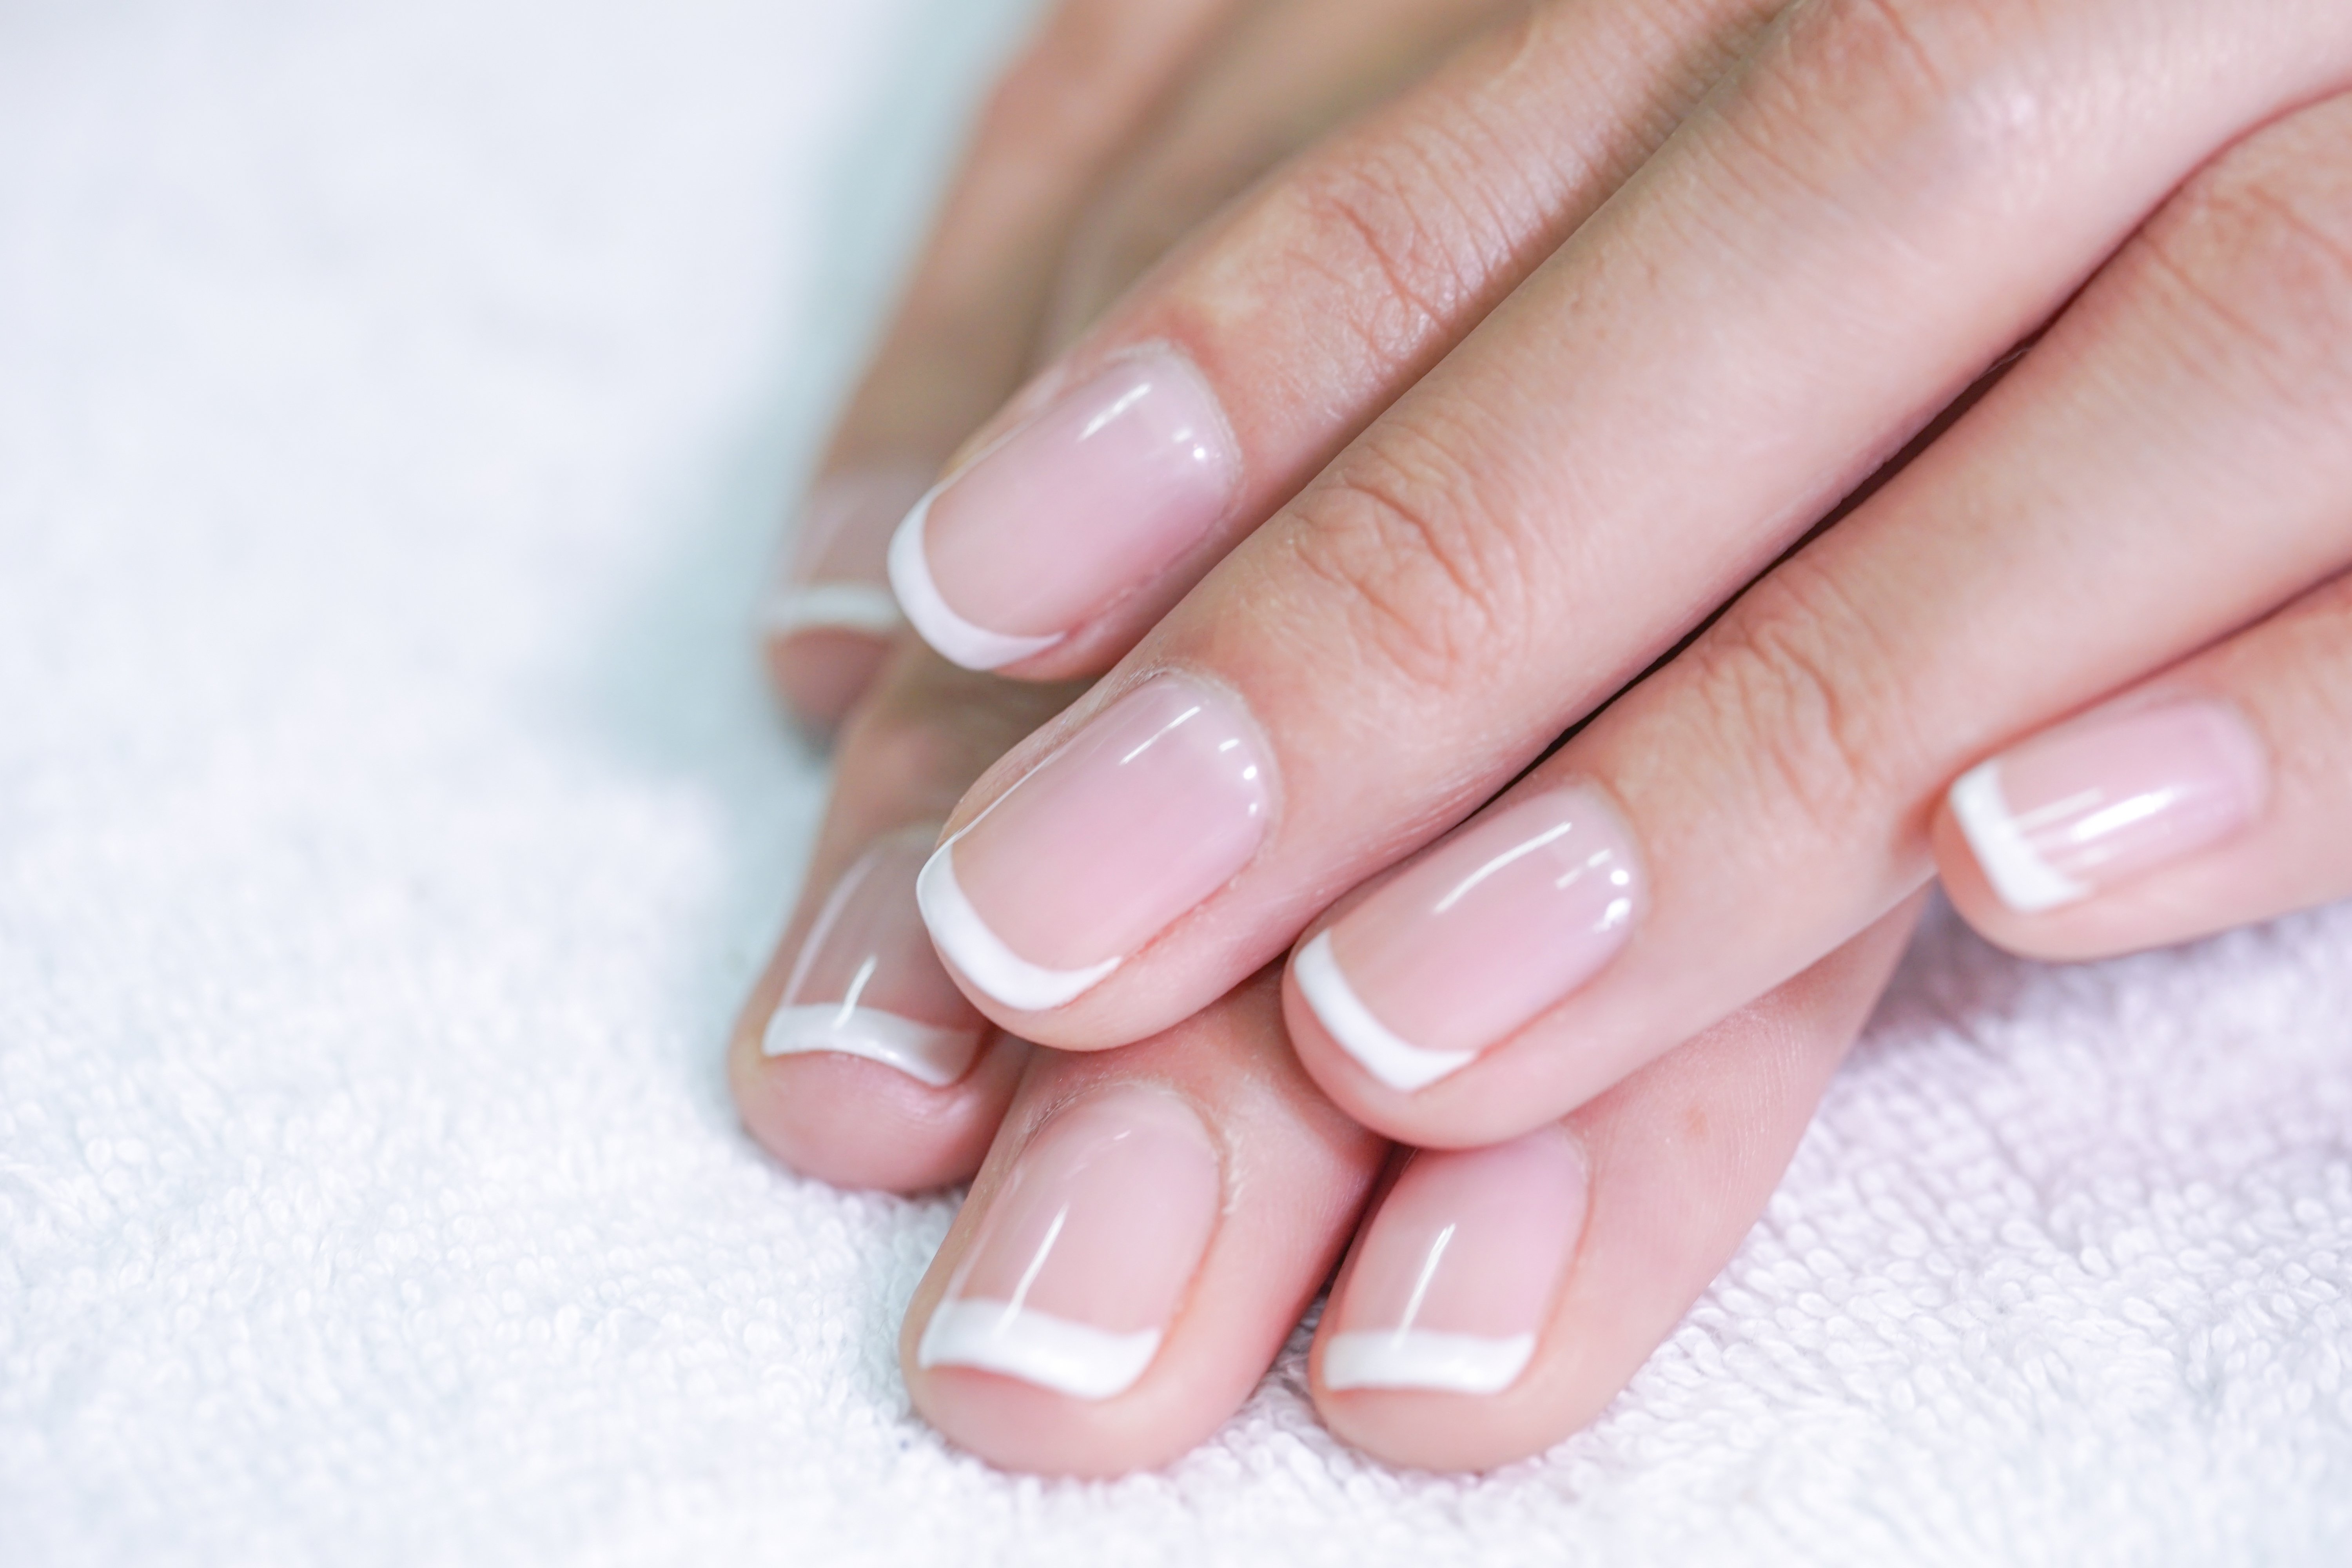 Classic French manicure nails | Source: Getty Images